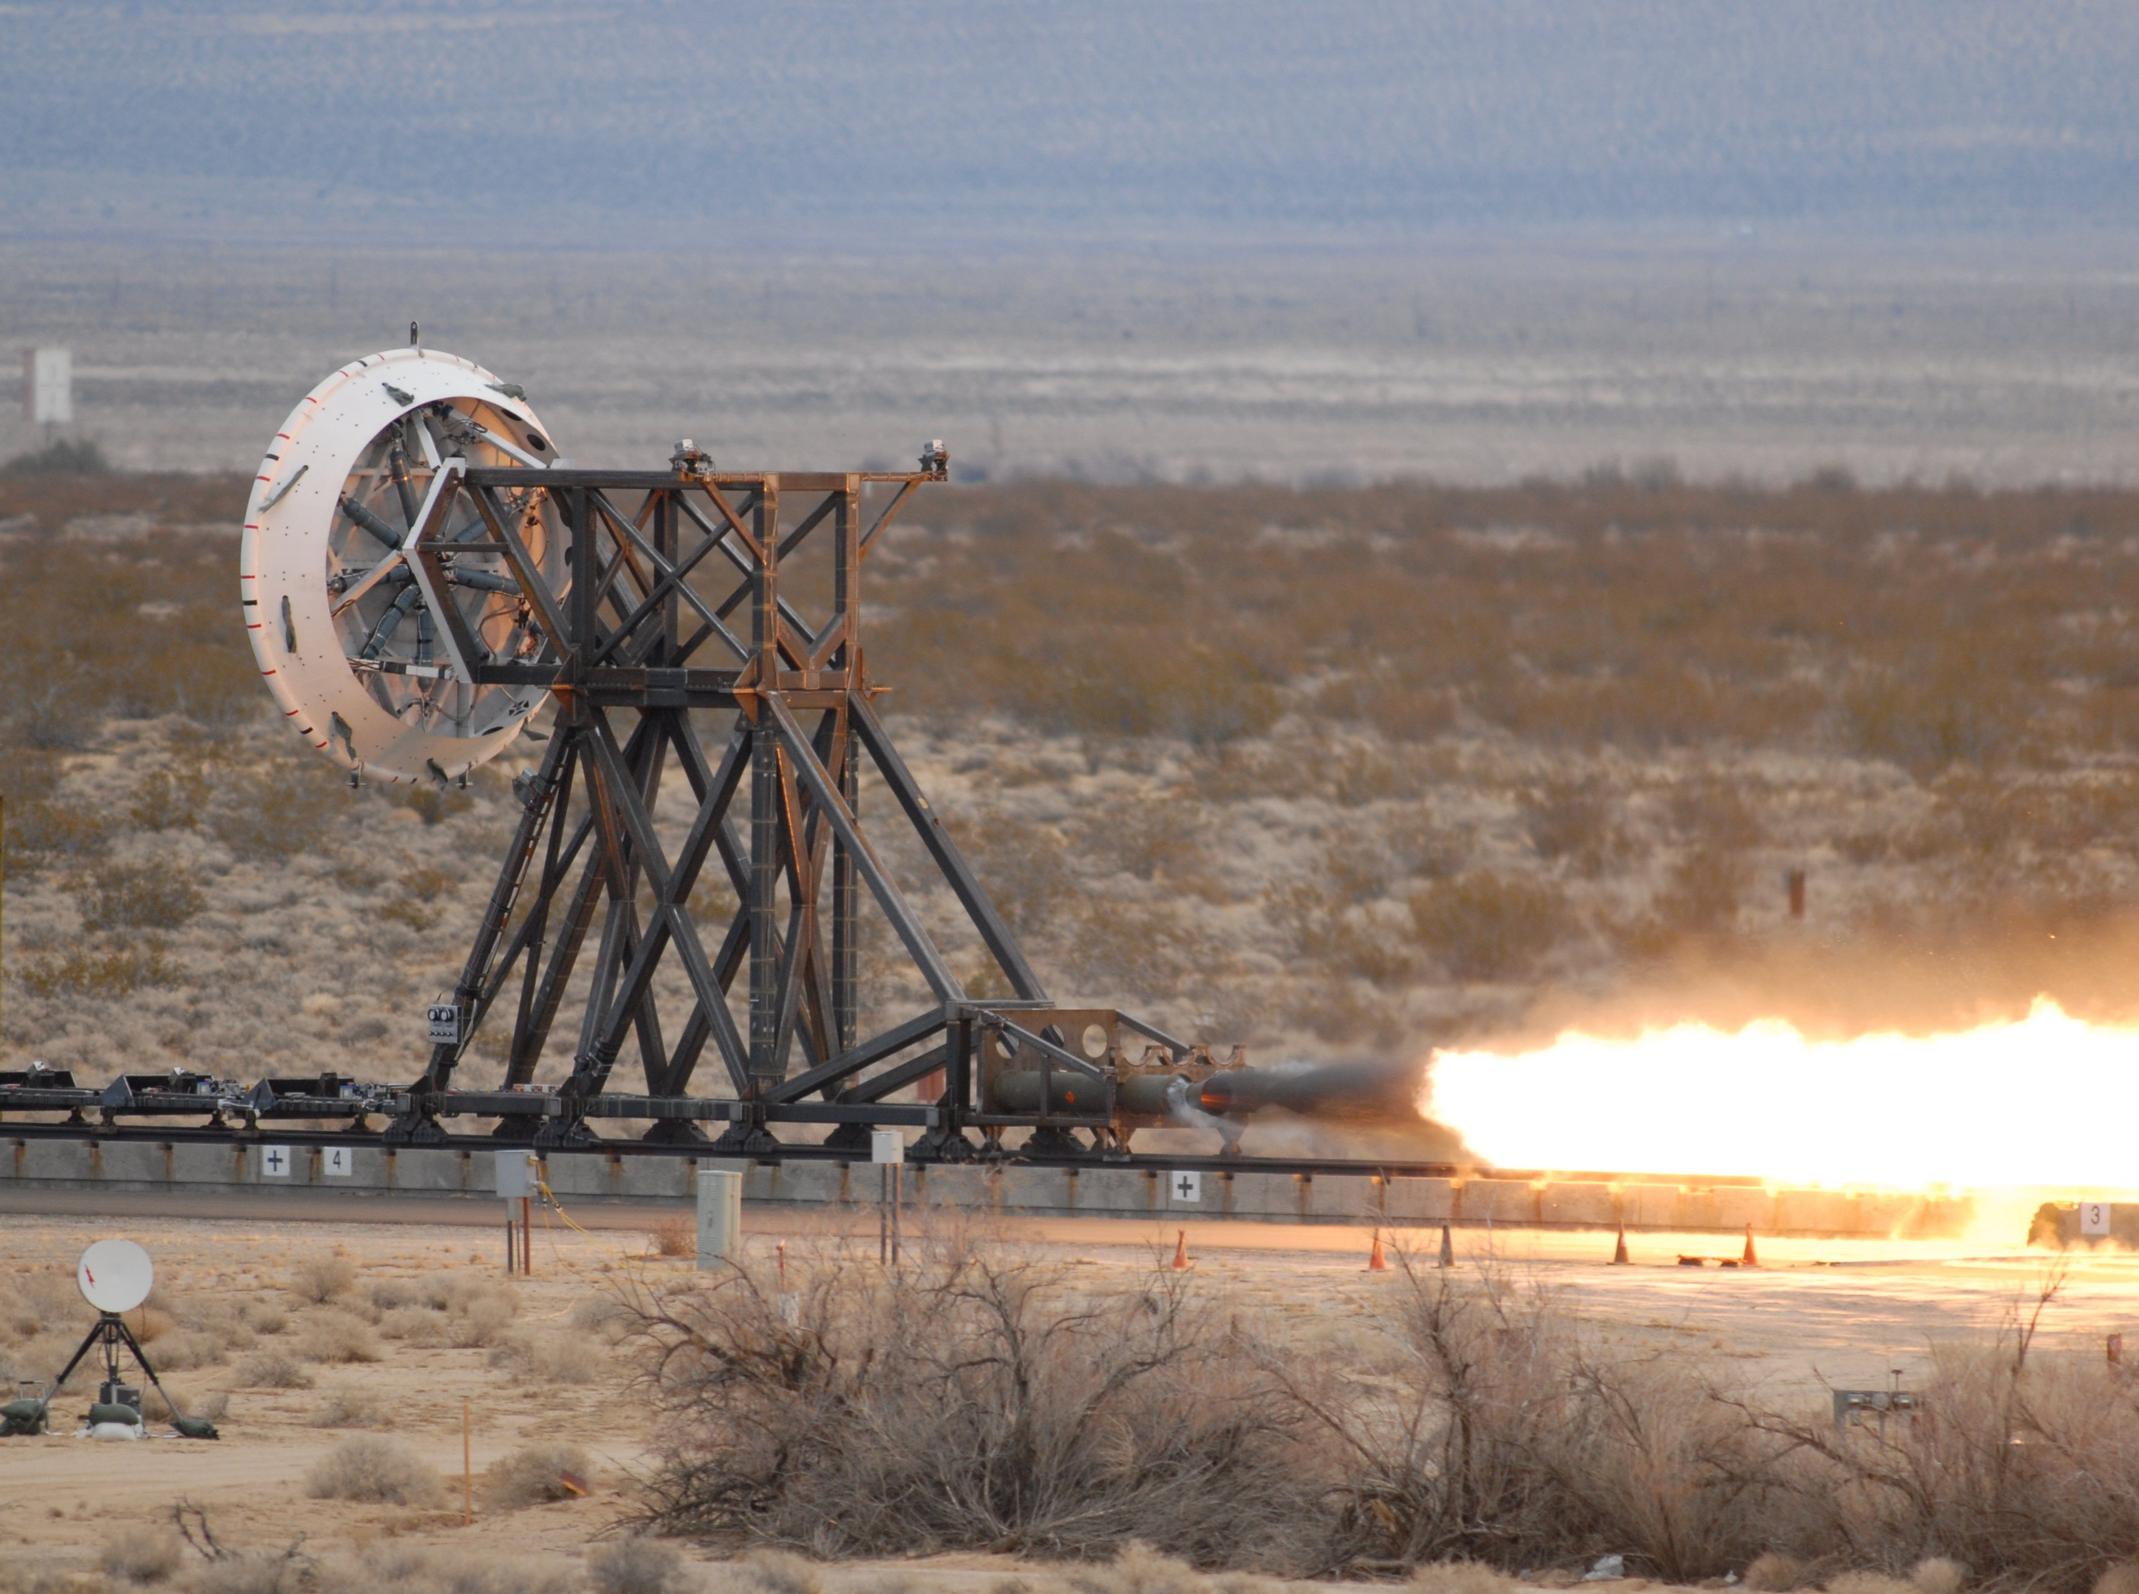 An image showing a rocket firing.  The rocket is on a train track to replicate the forces a supersonic spacecraft would experience prior to landing.